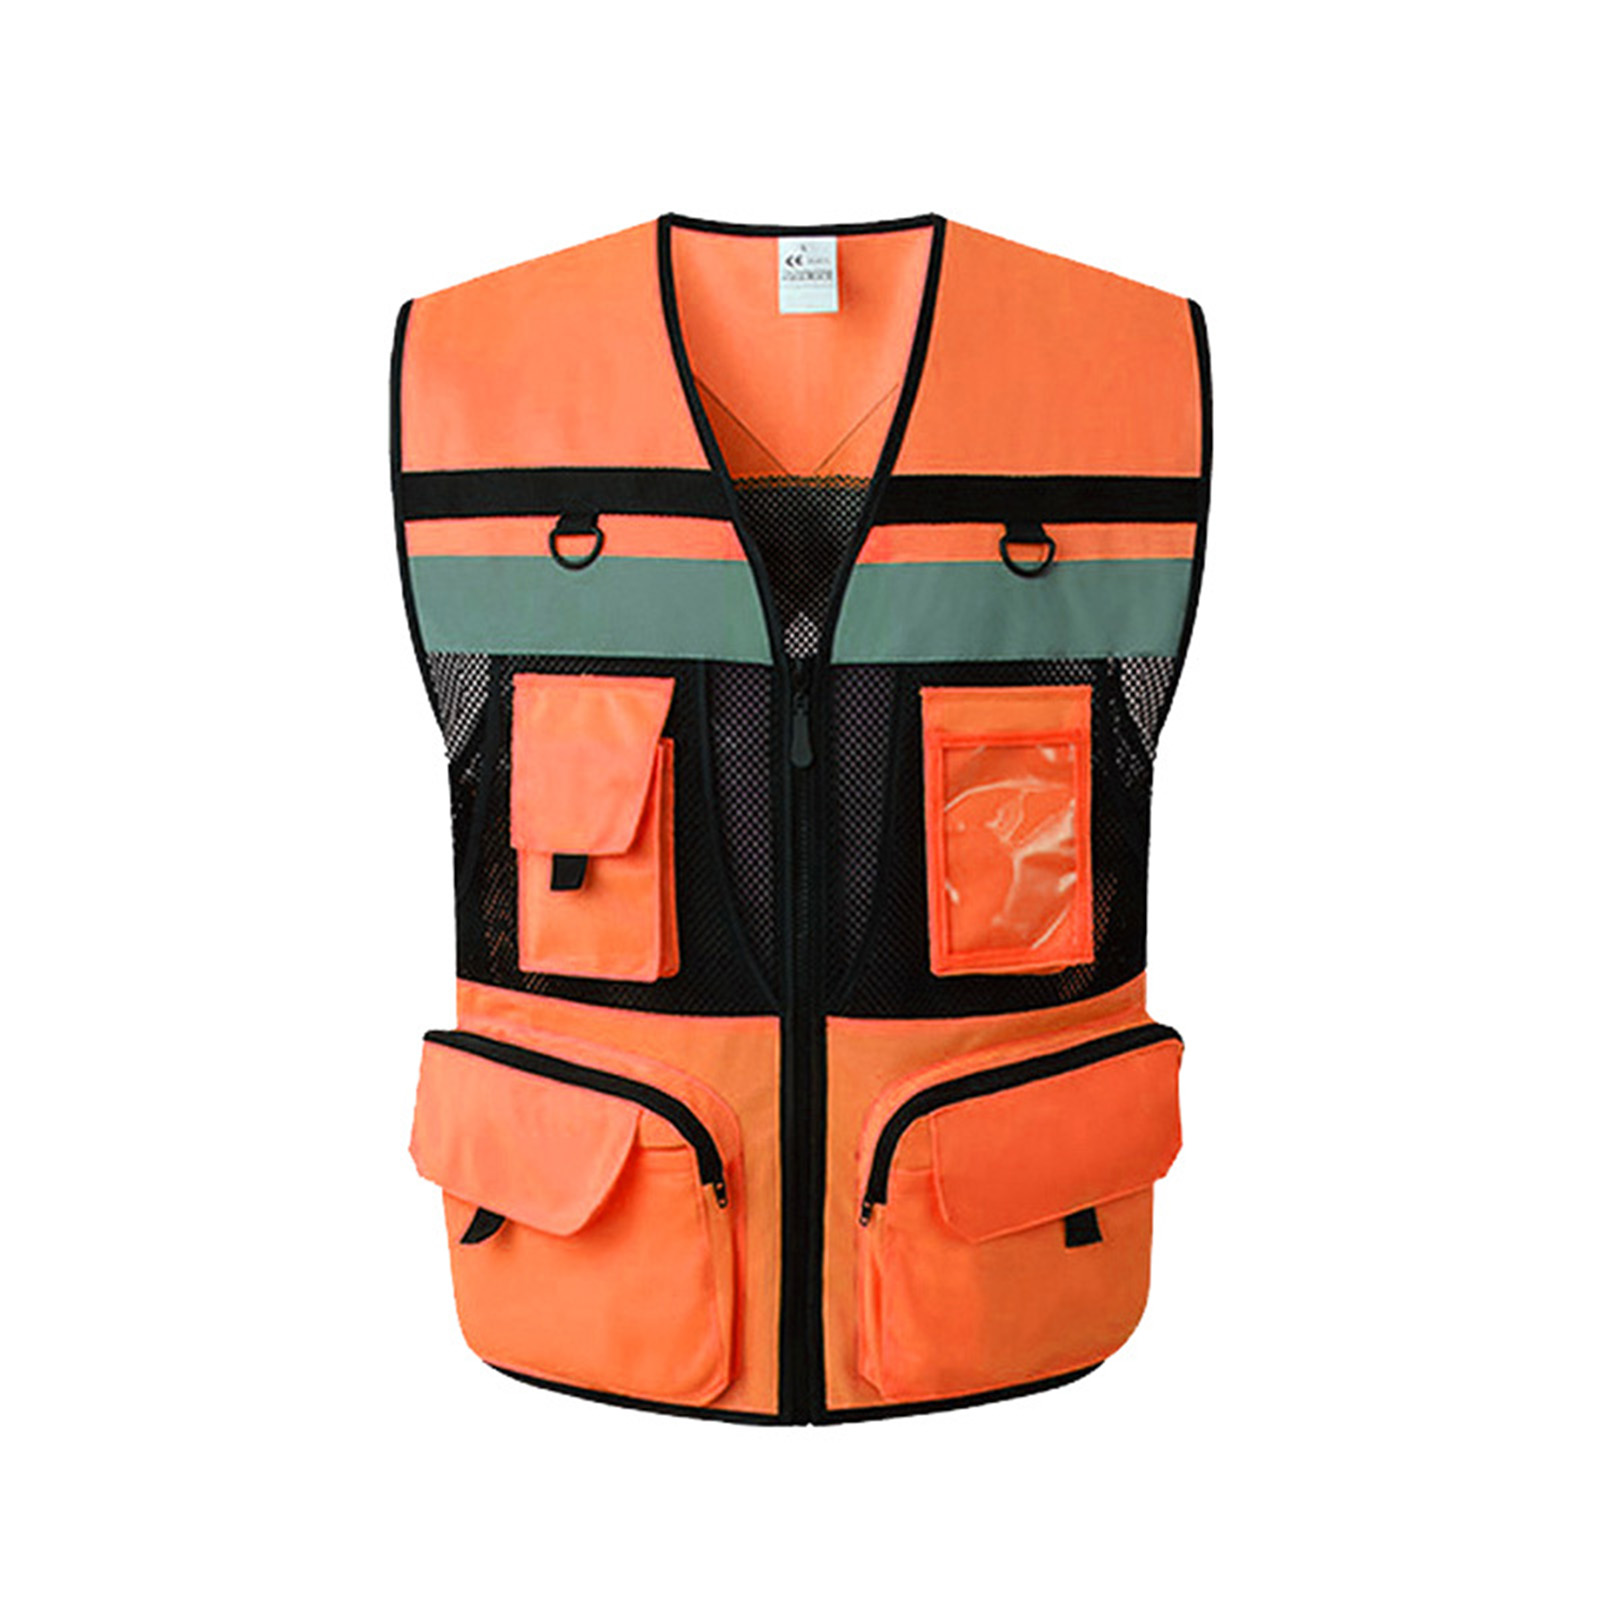 15 Pack Reflective Safety Vests with Pockets and Zipper, High Visibility Co - 3